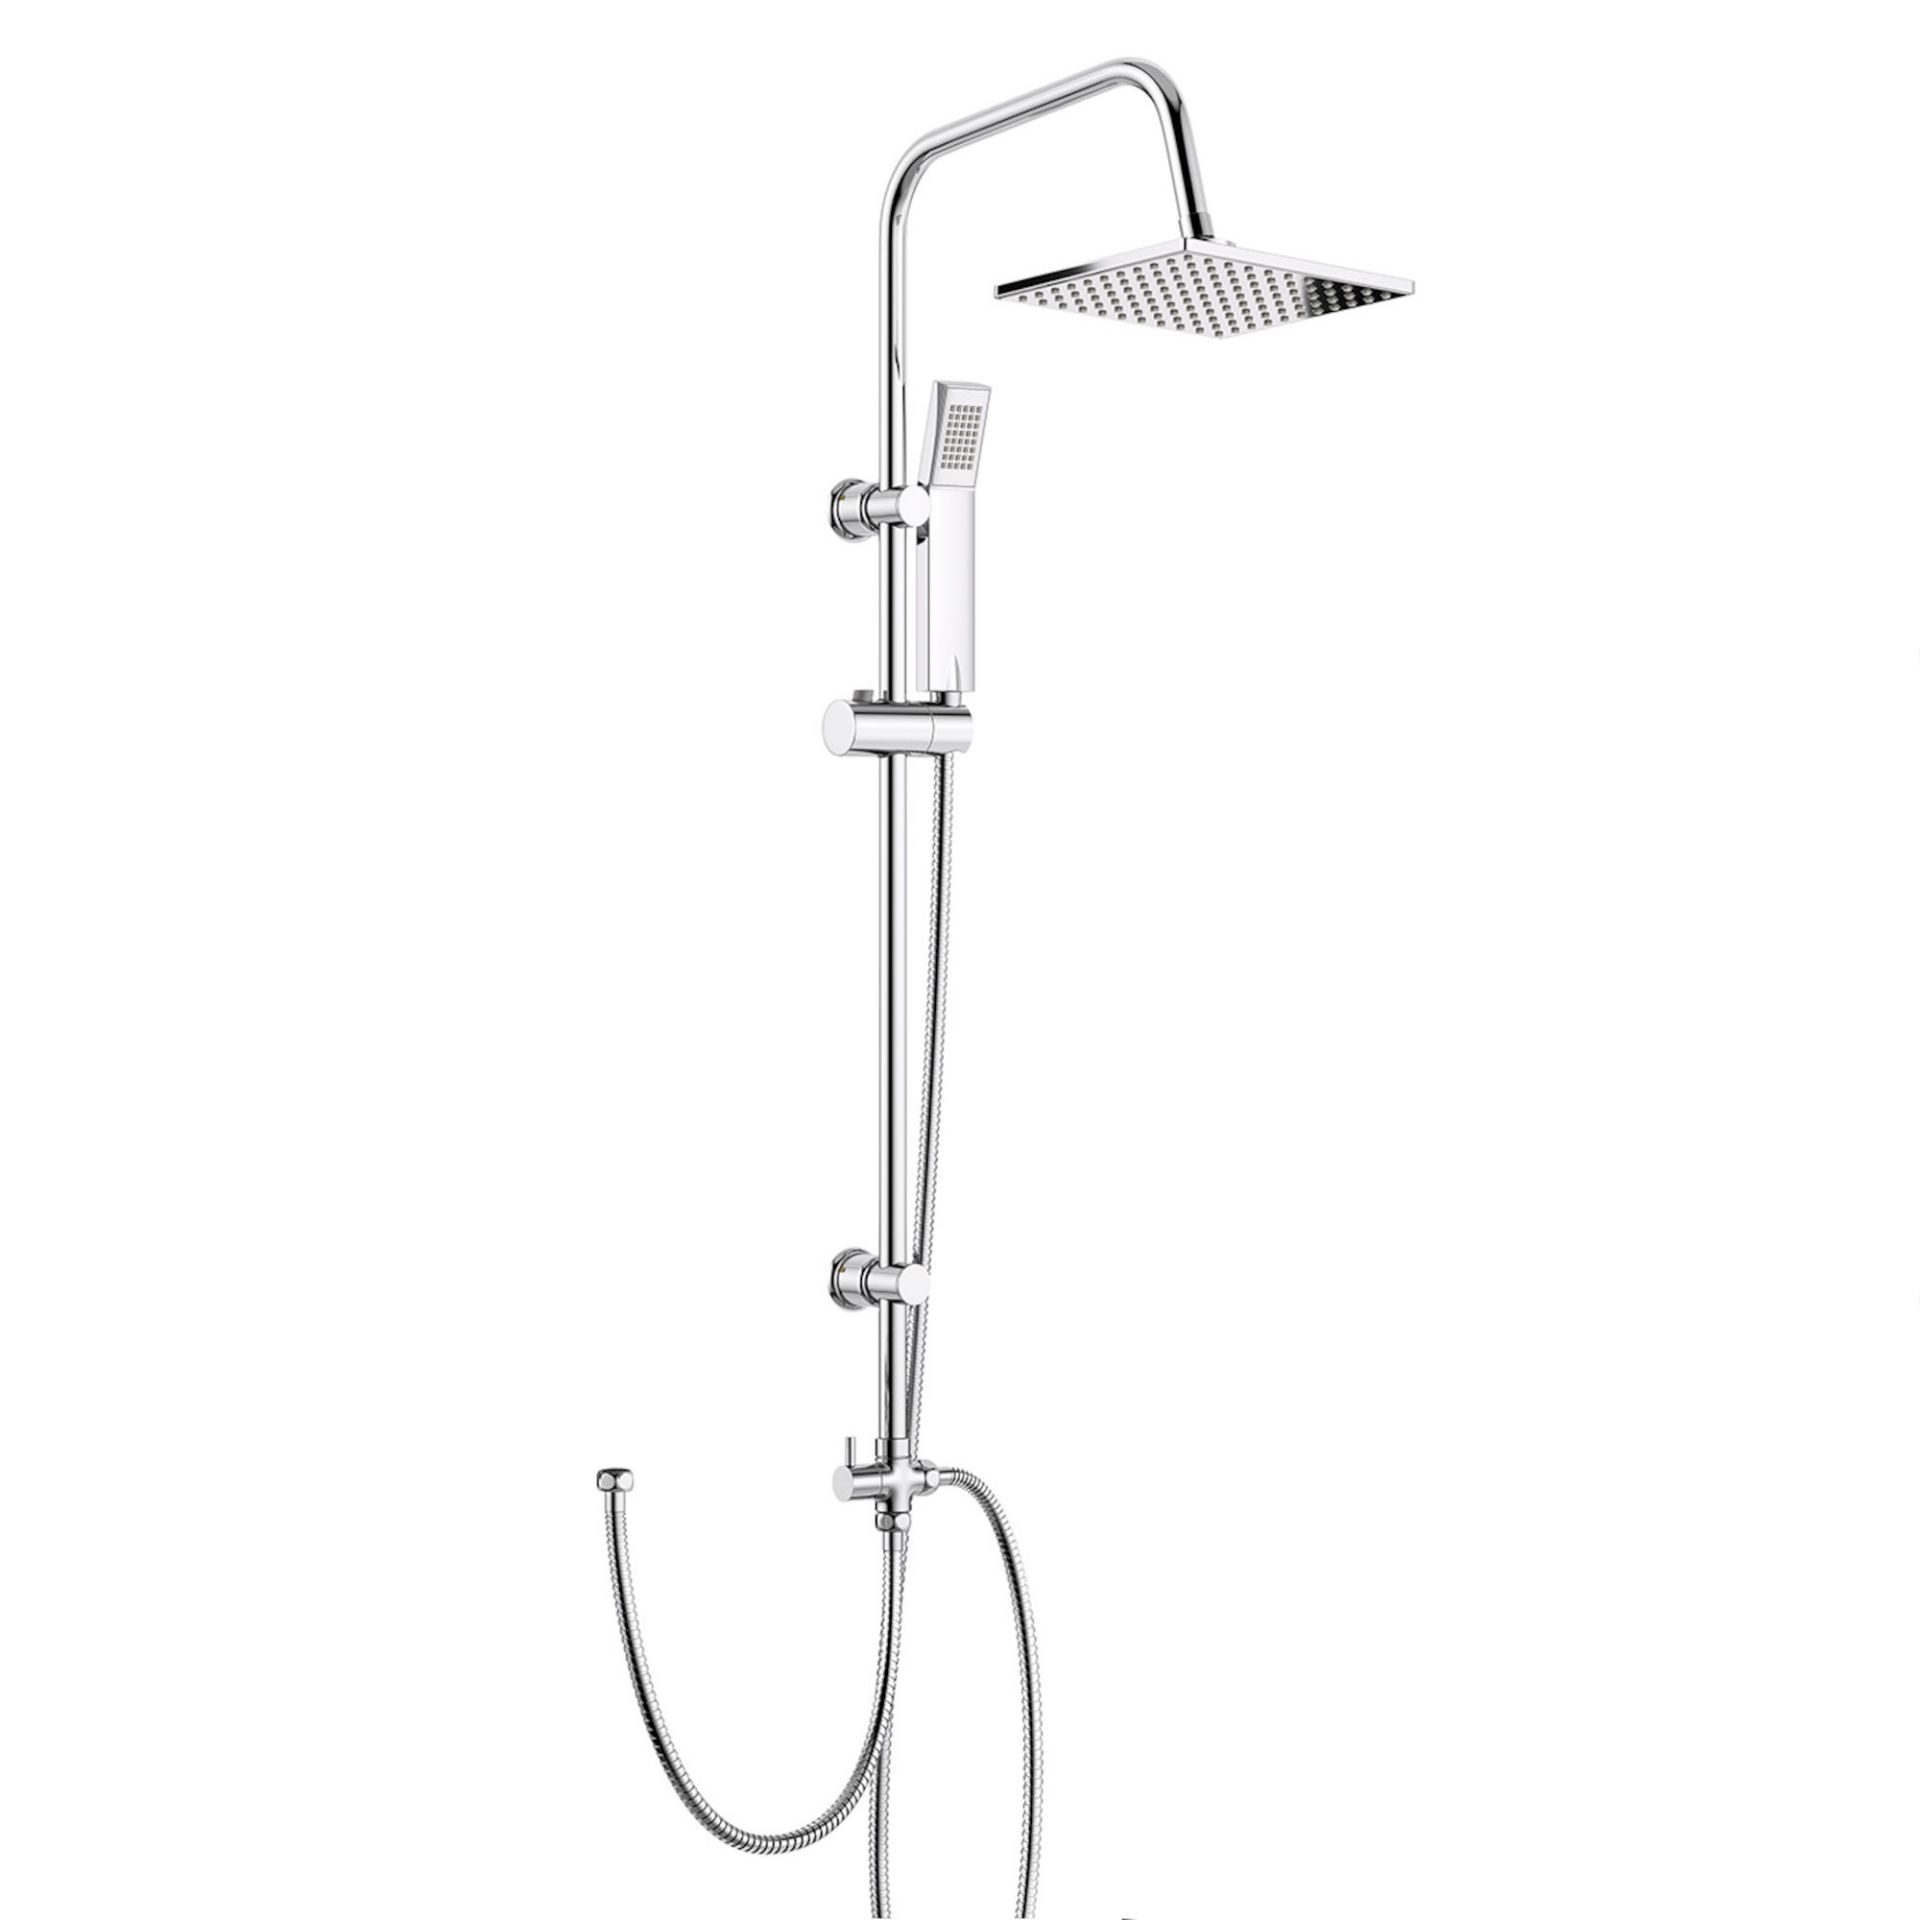 200mm Square Head, Riser Rail & Handheld Kit Quality stainless steel shower head with Easy Cle... - Image 2 of 4